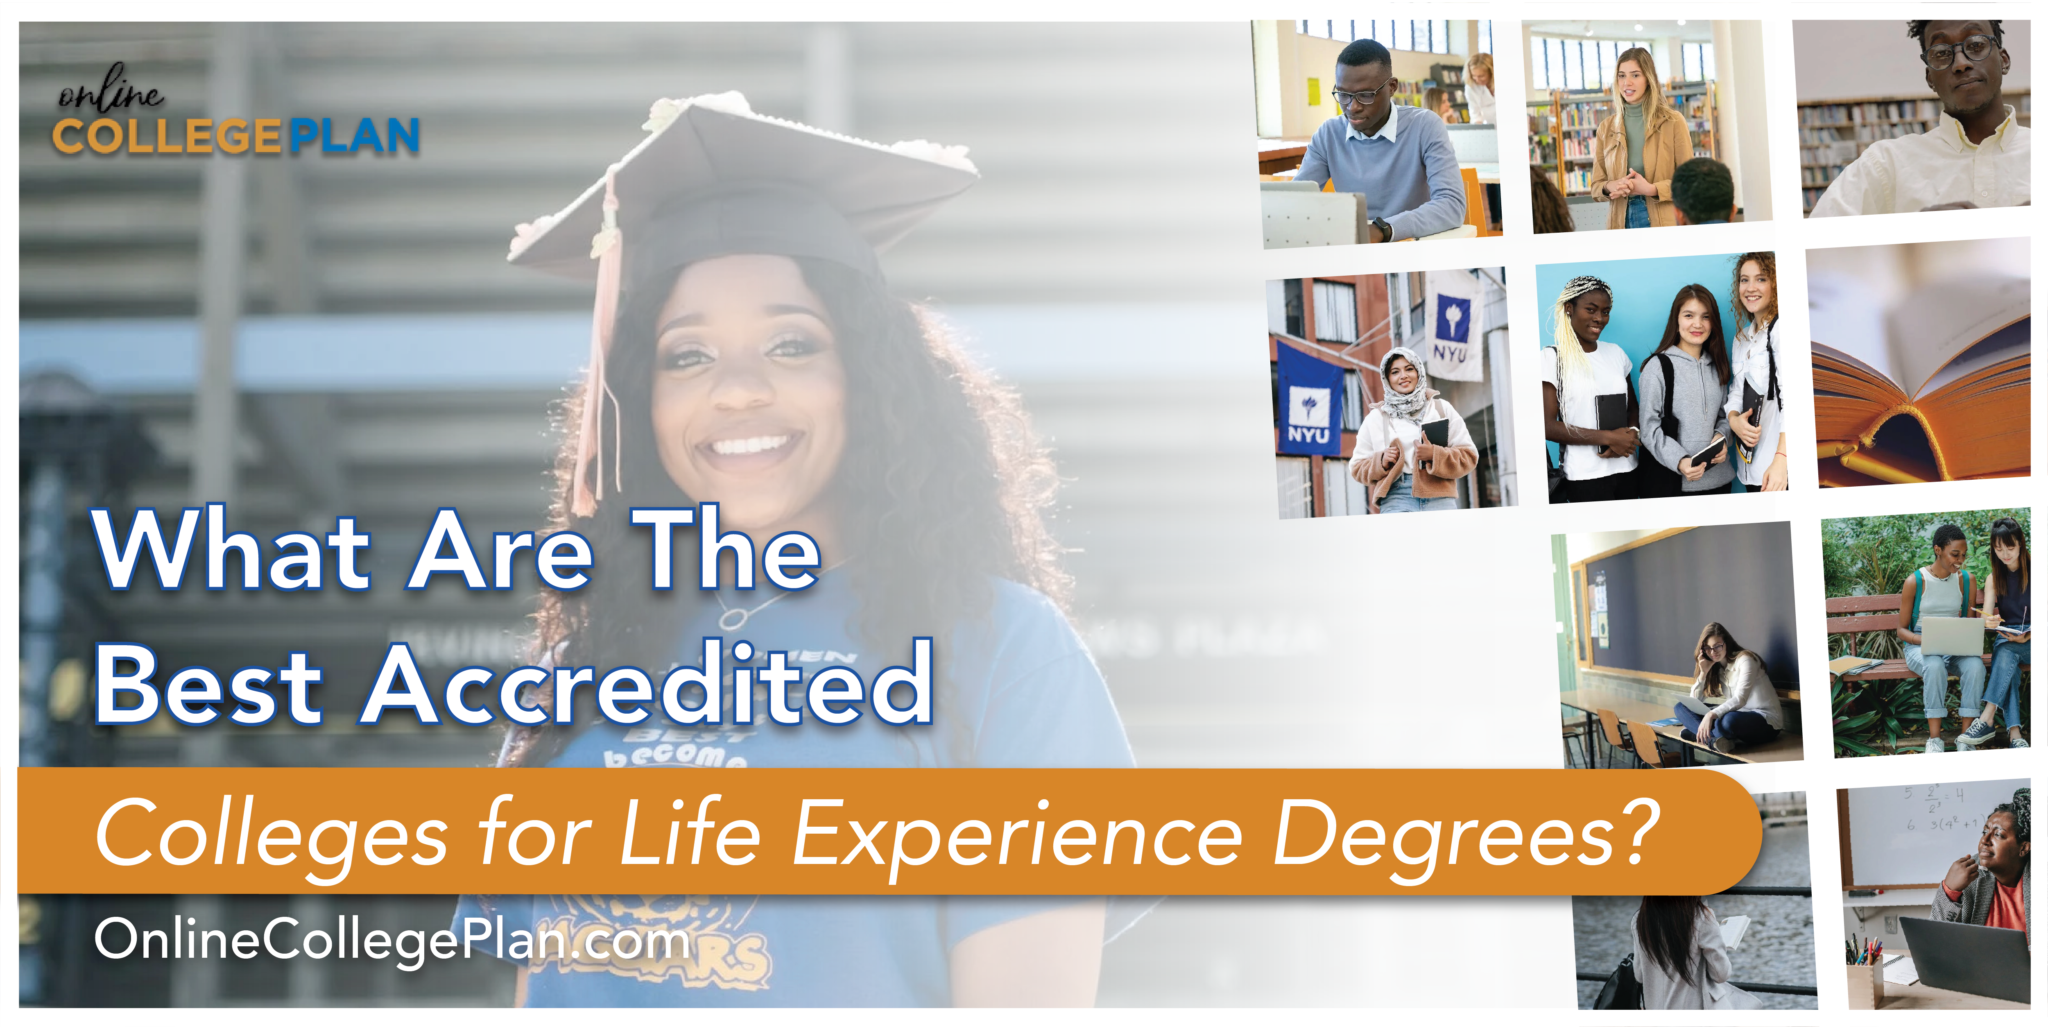 What Are the Best Accredited Colleges for Life Experience Degrees?